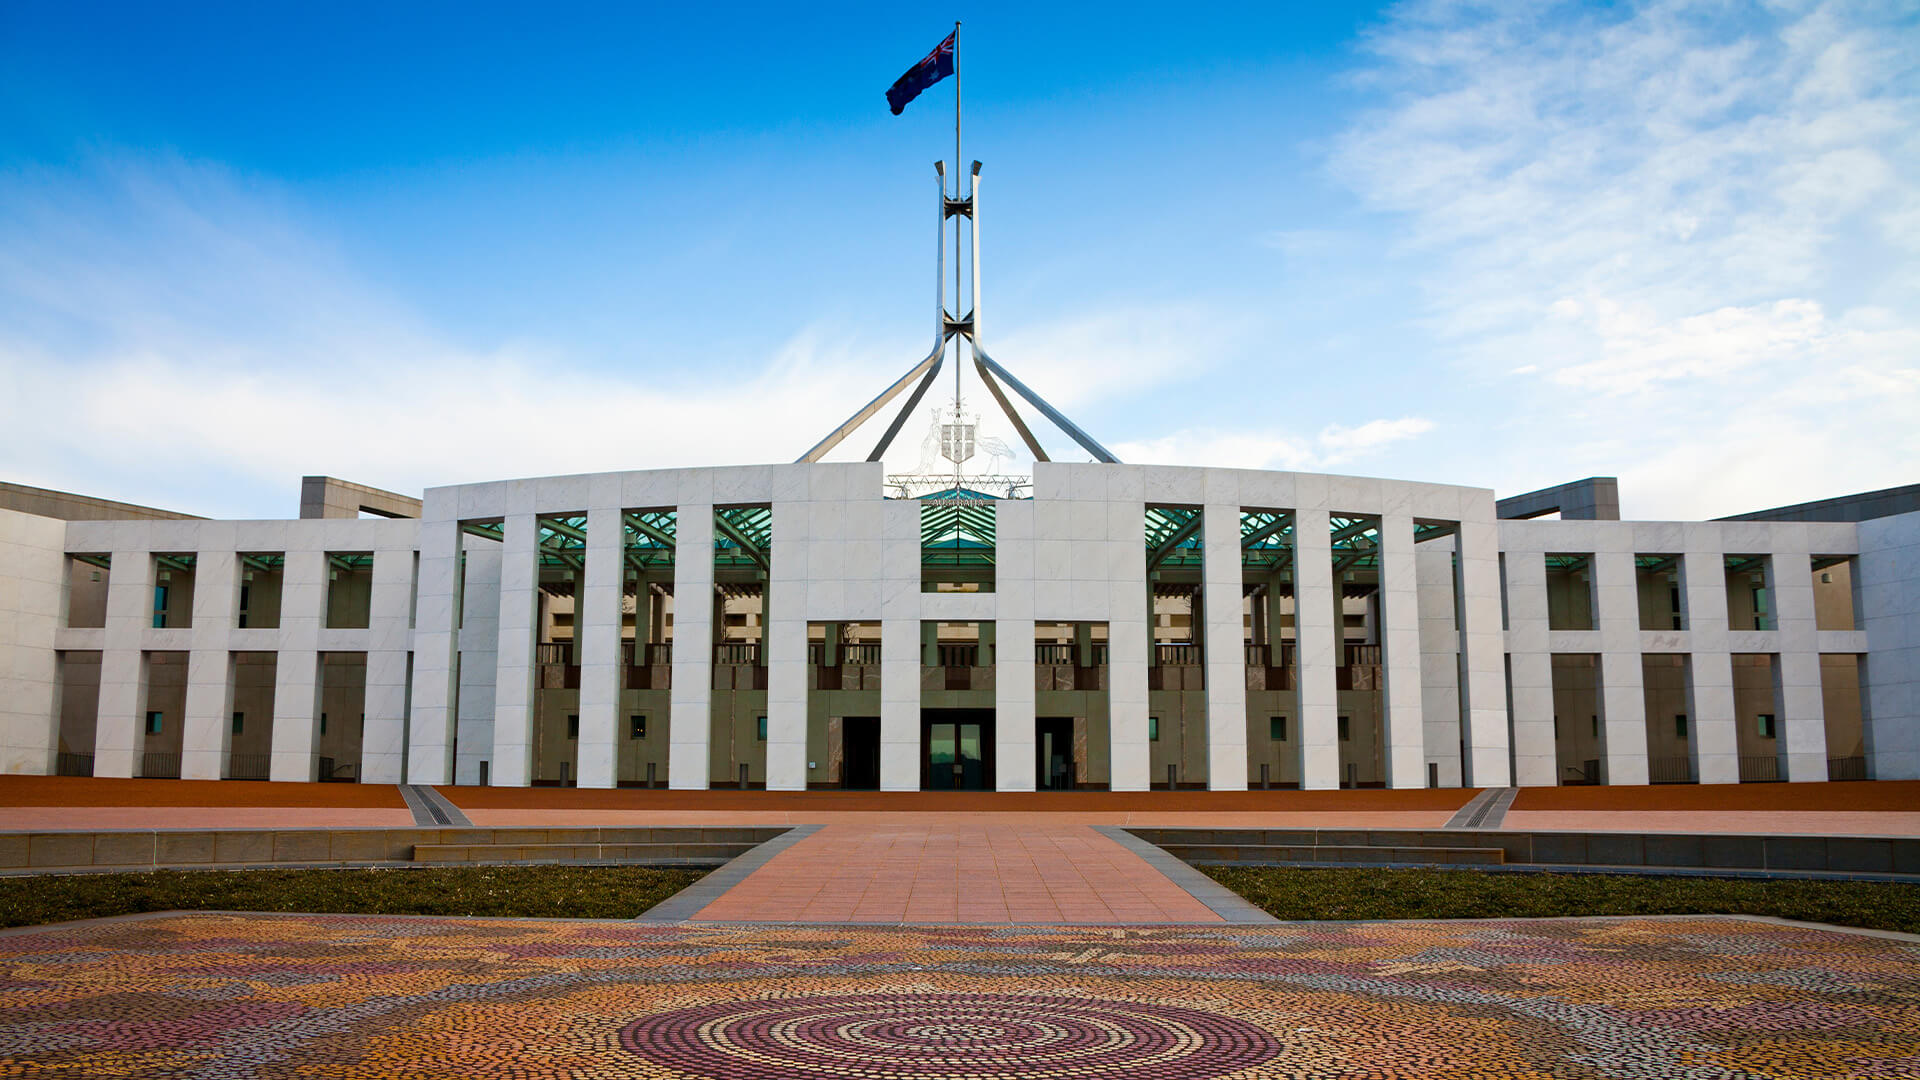 Exterior of the Australian Parliament House in Canberra